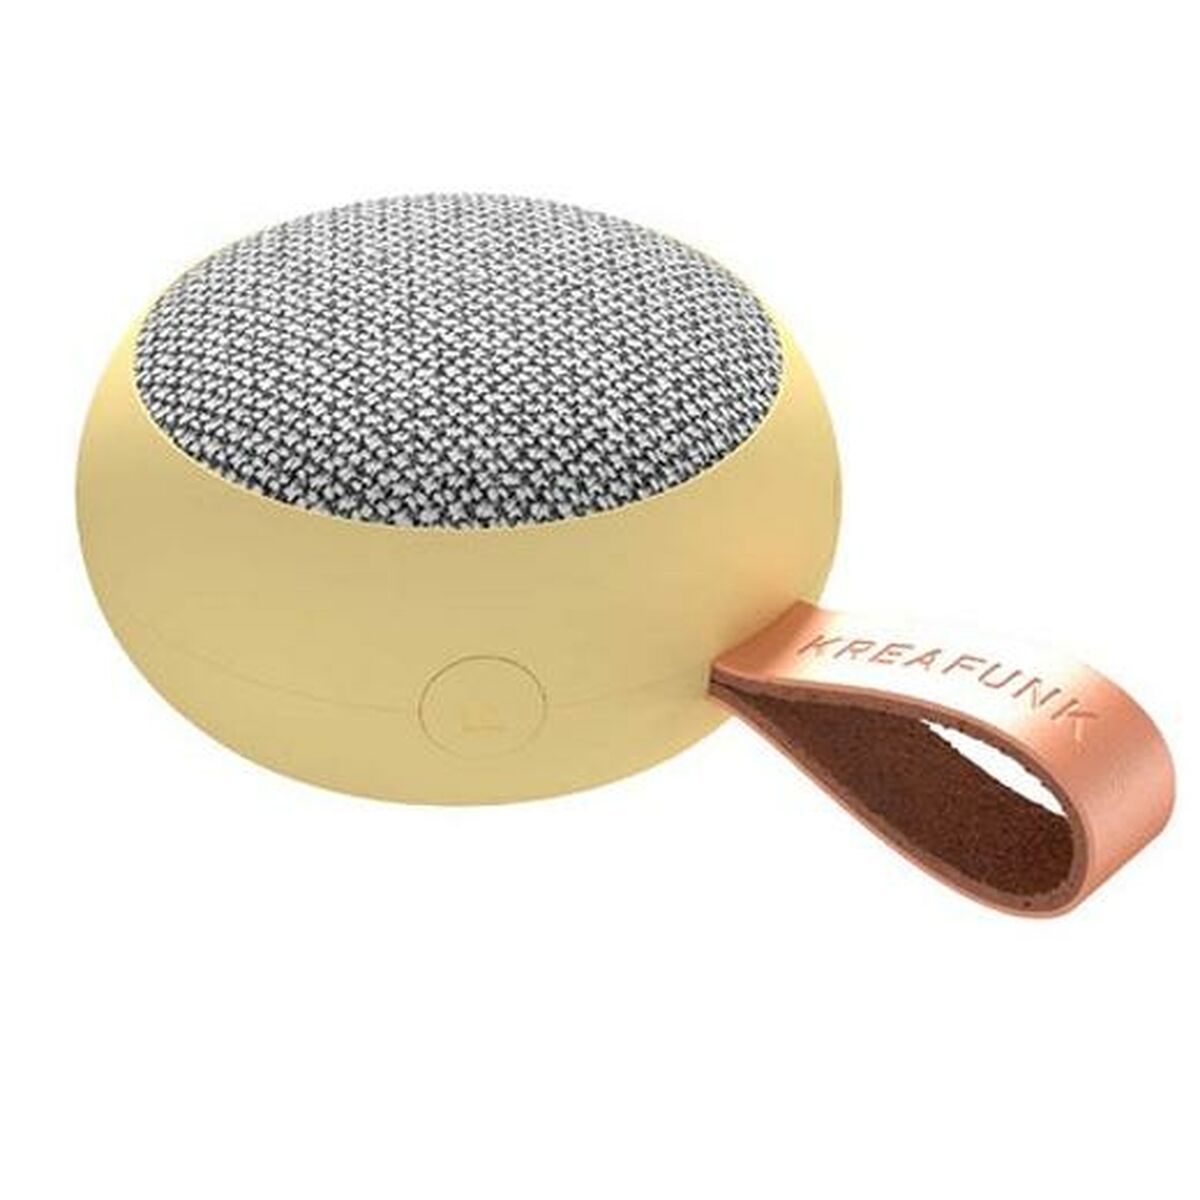 Portable Bluetooth Speakers Kreafunk Yellow 6 W, Kreafunk, Electronics, Mobile communication and accessories, portable-bluetooth-speakers-kreafunk-yellow-6-w, Brand_Kreafunk, category-reference-2609, category-reference-2882, category-reference-2923, category-reference-t-19653, category-reference-t-21311, category-reference-t-4036, category-reference-t-4037, Condition_NEW, entertainment, music, office, Price_50 - 100, telephones & tablets, wifi y bluetooth, RiotNook